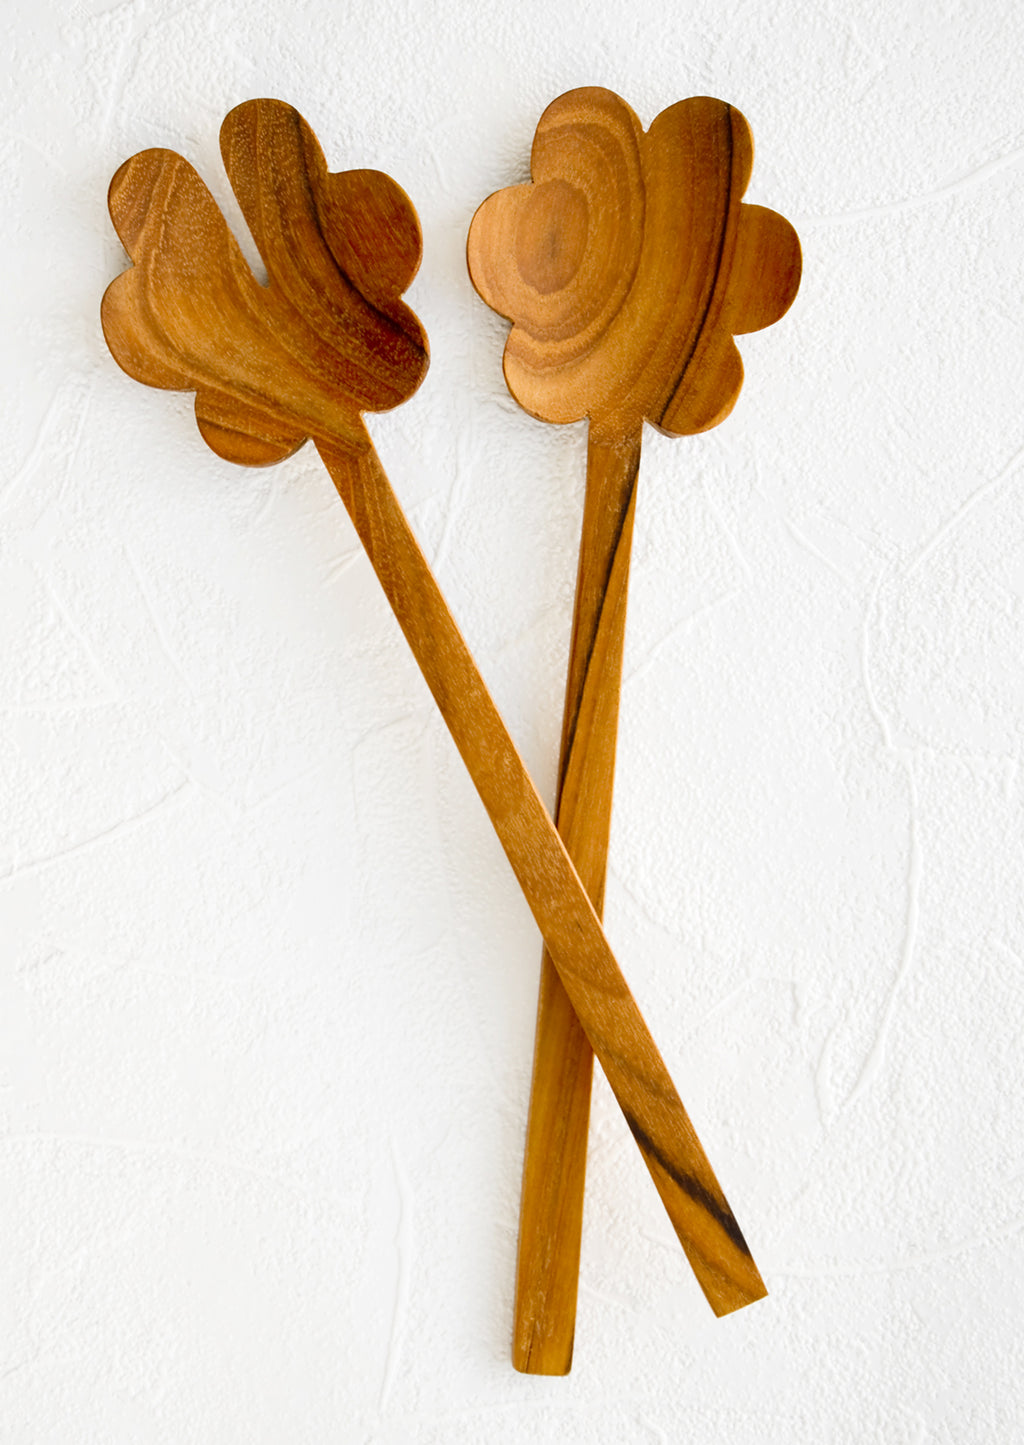 3: Pair of wooden, flower-shaped salad servers made from teak